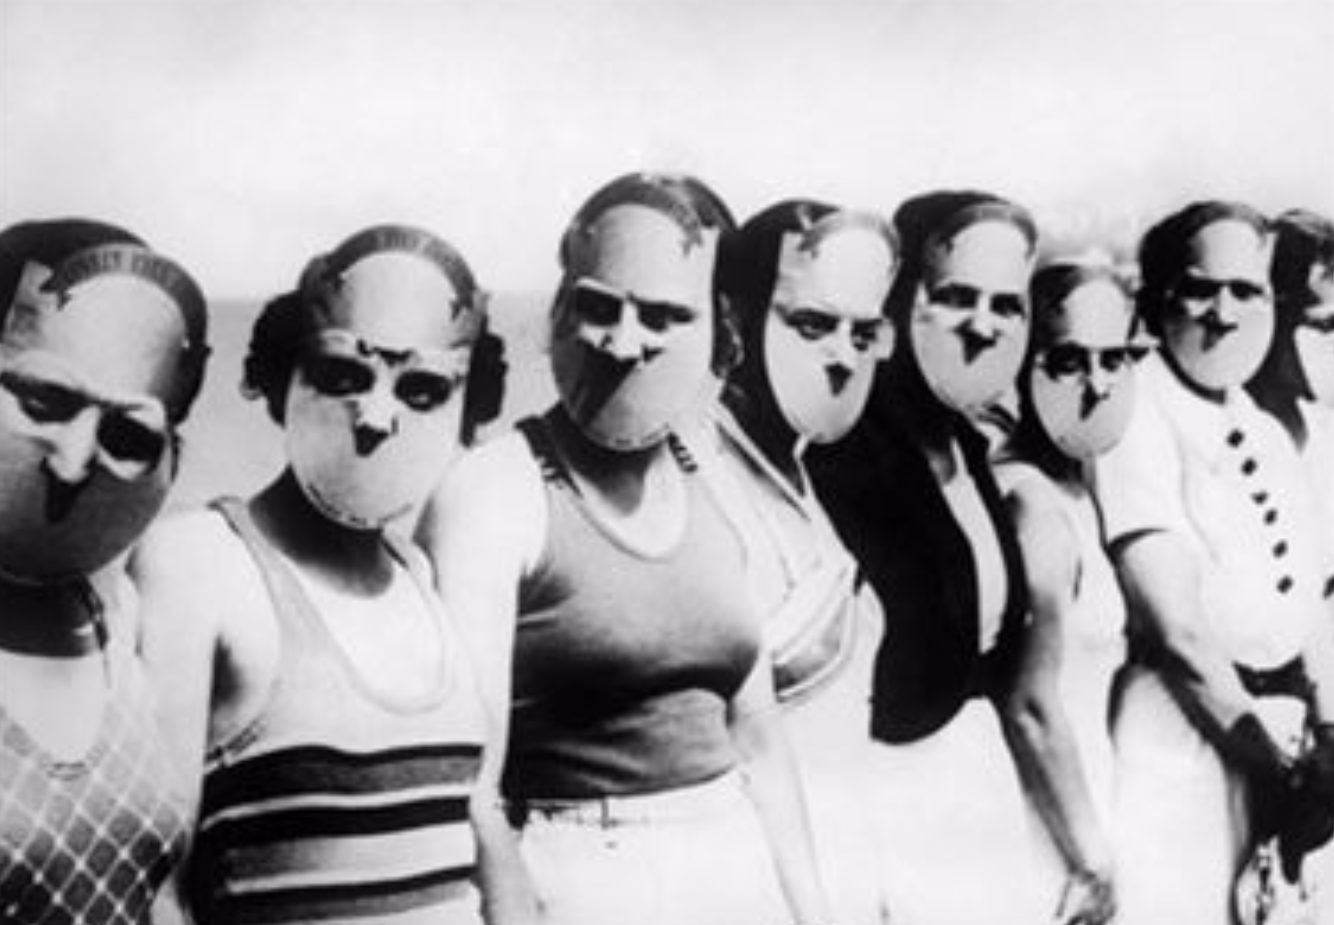 The participants of the Miss Lovely Eyes competition in Florida held in 1930.